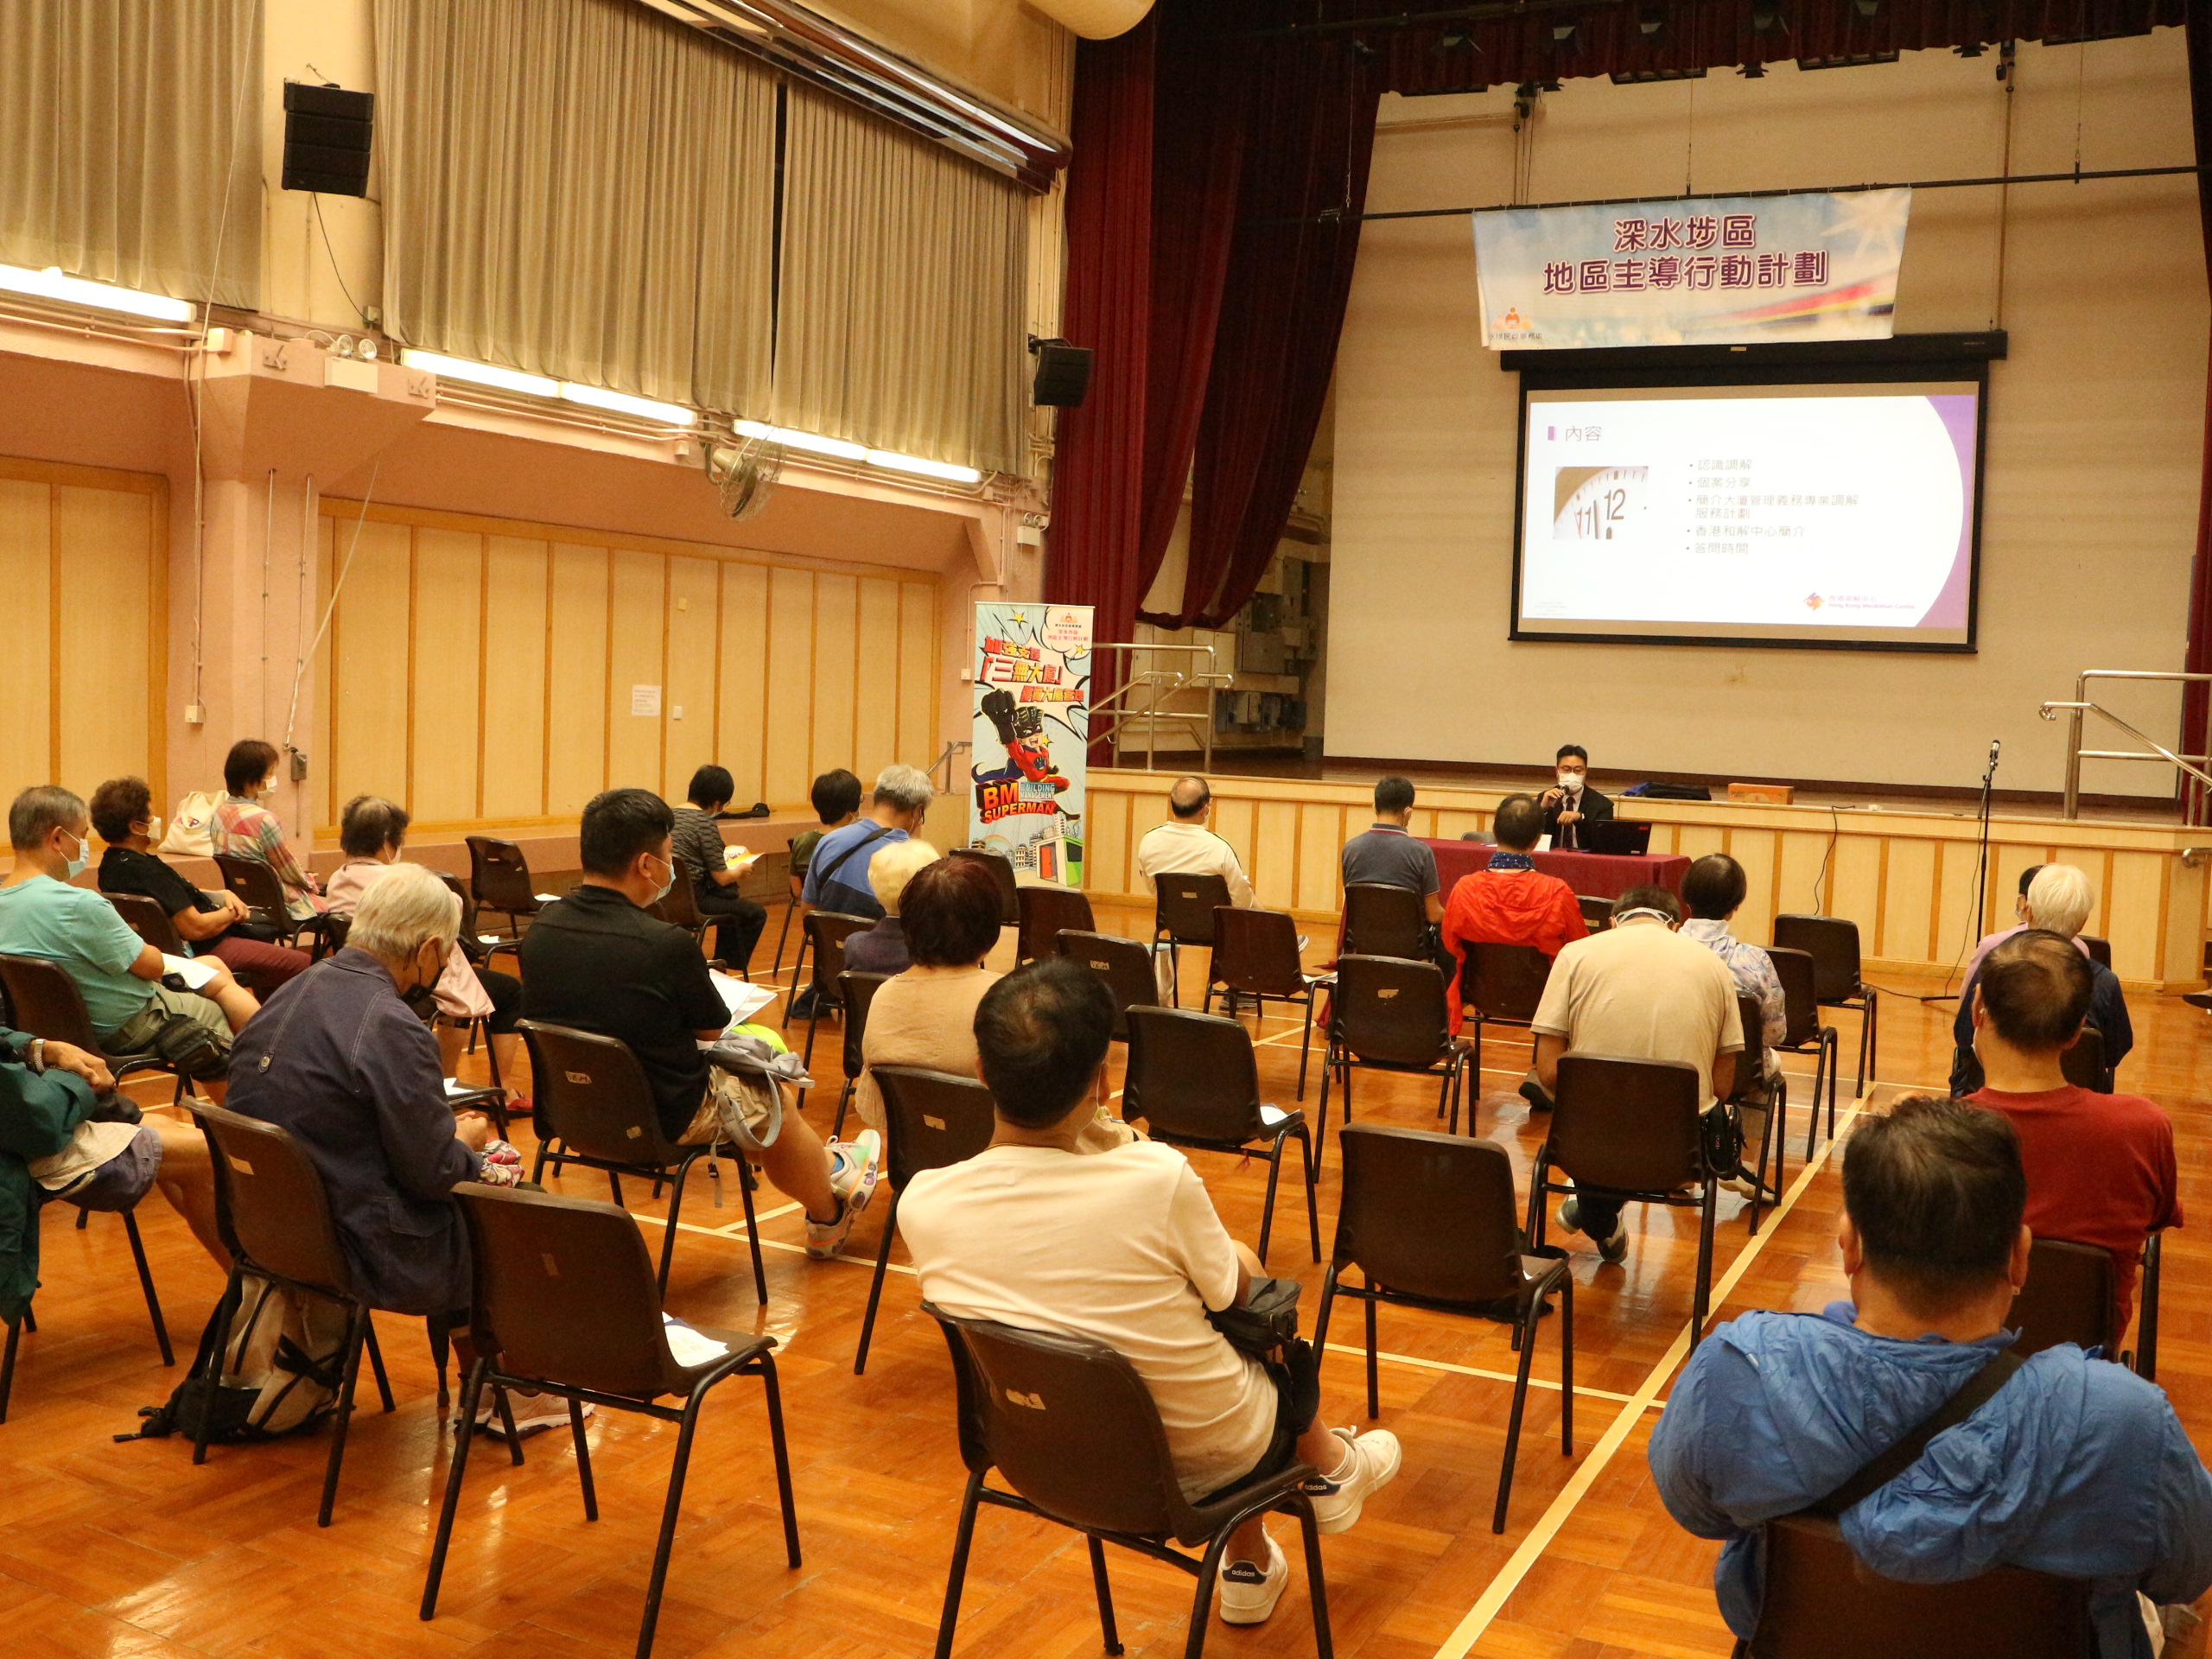 Sham Shui Po District-led Actions Scheme – Building Management Talk (Presentation on “Safe Purchase on Household Electrical Appliances” and “Case Sharing and Practice on Building Management Mediation”)